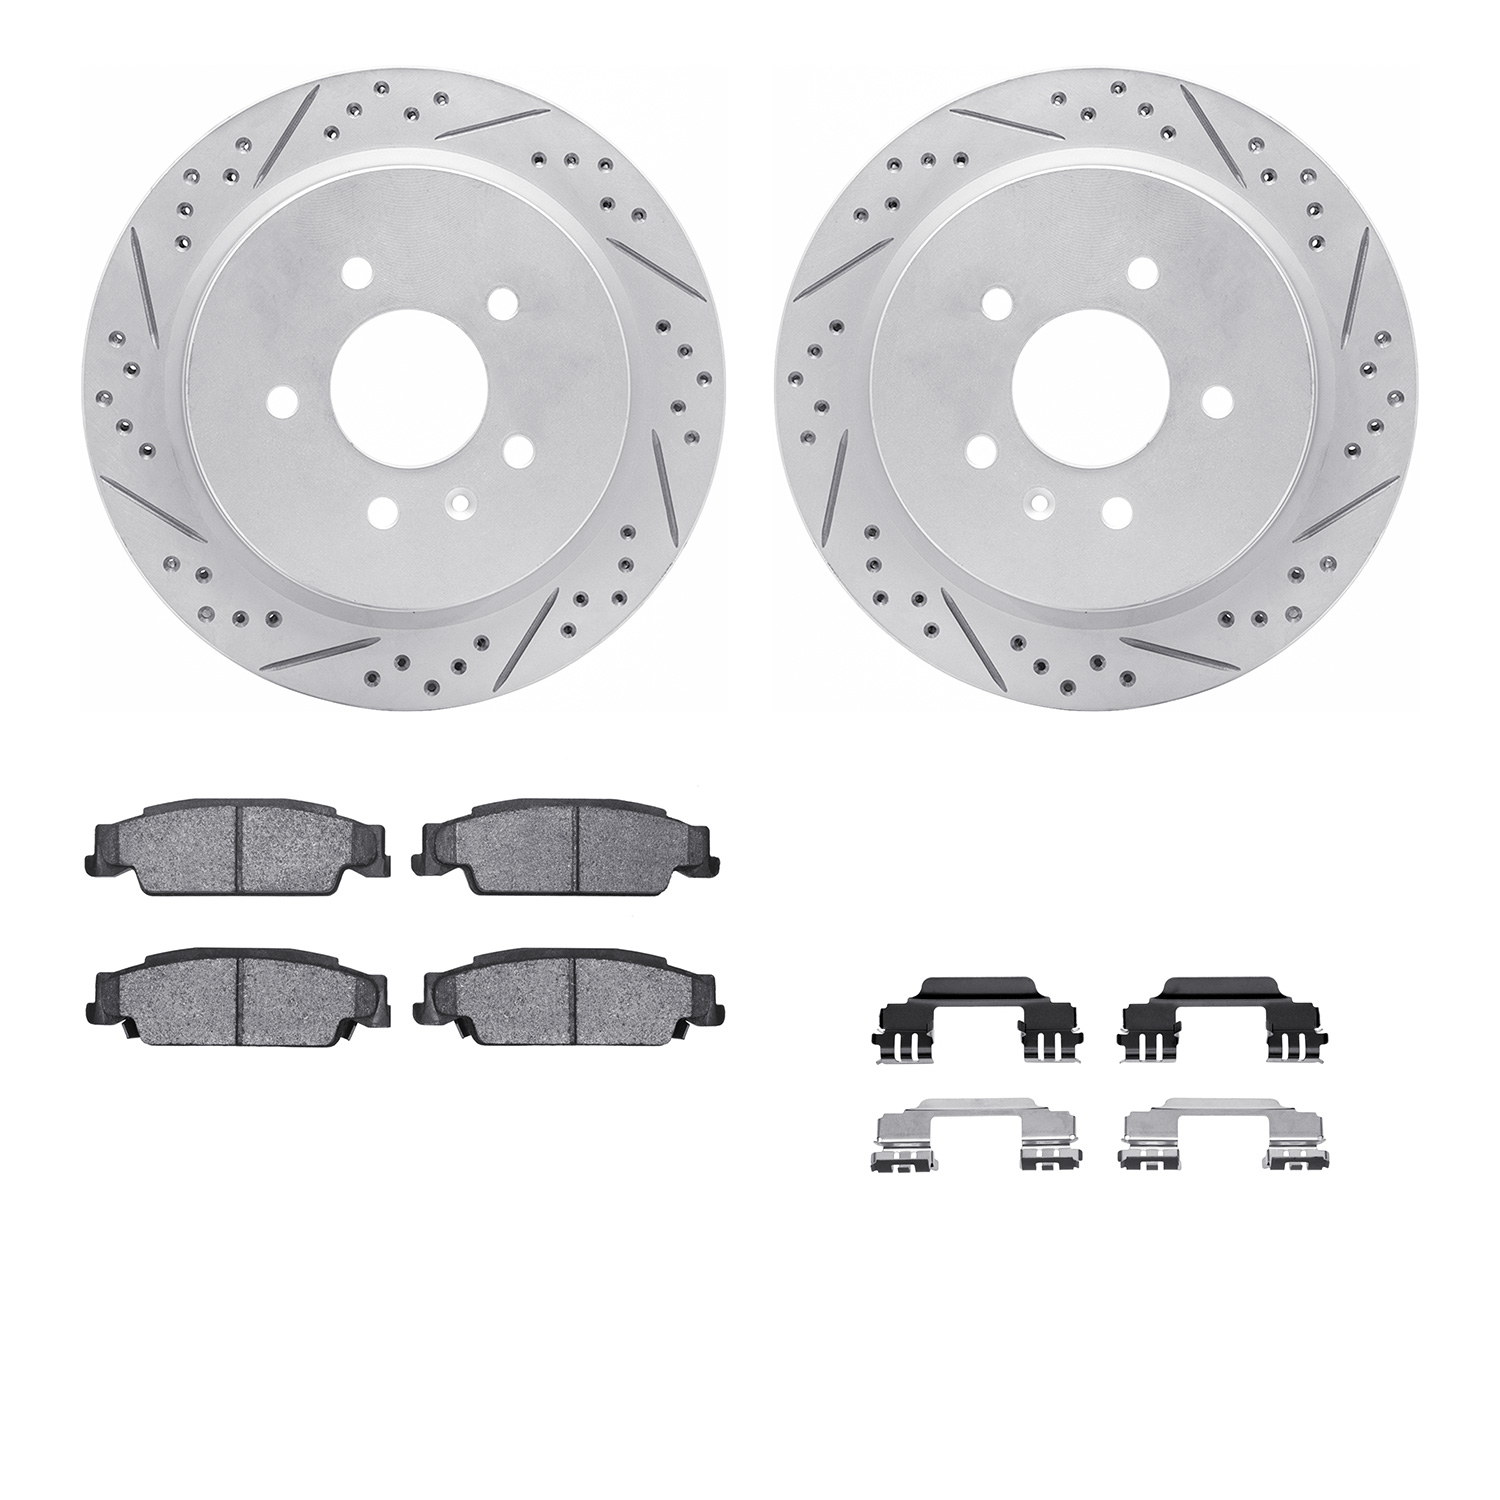 2512-46002 Geoperformance Drilled/Slotted Rotors w/5000 Advanced Brake Pads Kit & Hardware, 2003-2011 GM, Position: Rear